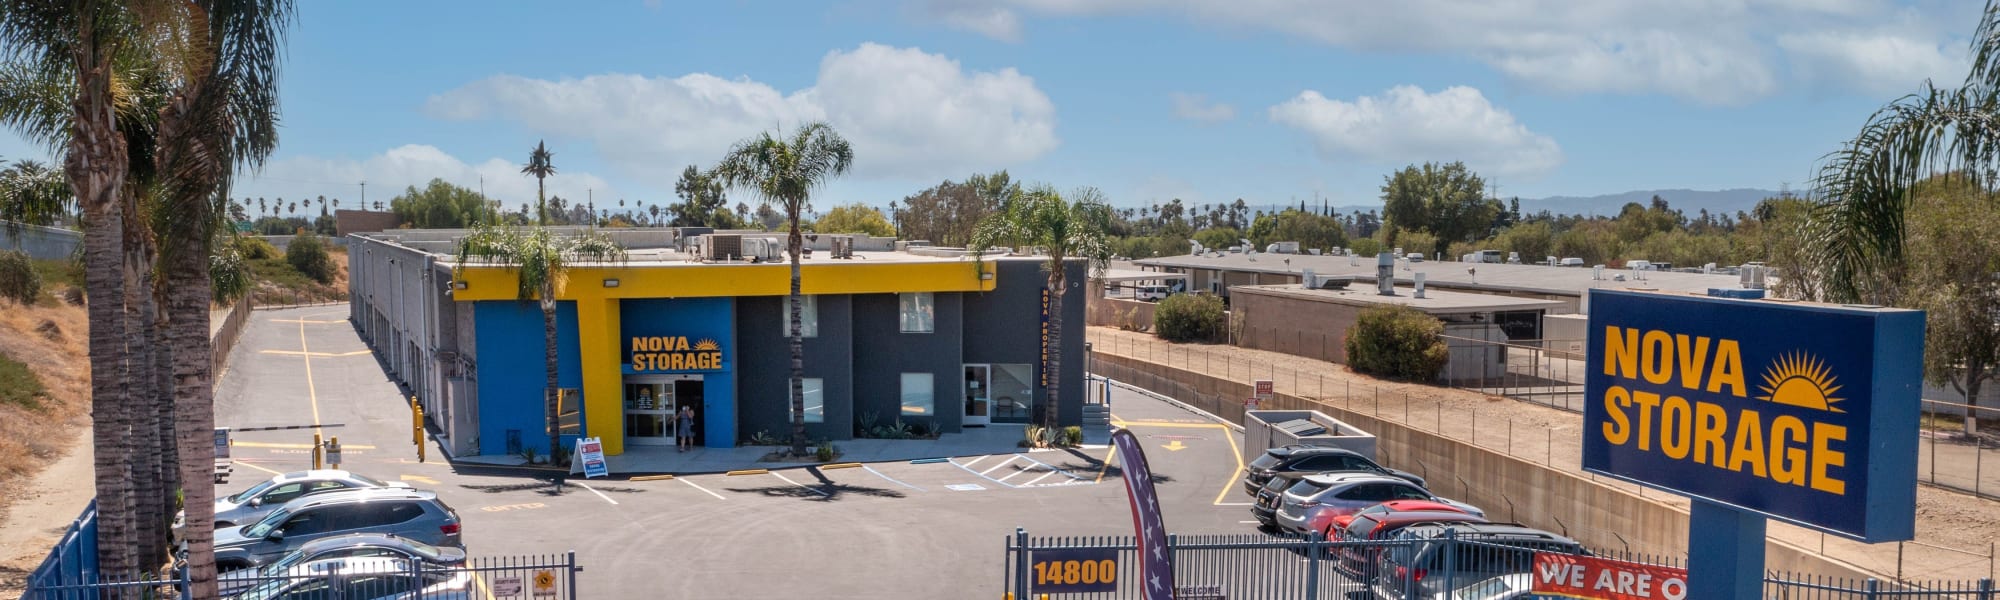 Hours and directions for Nova Storage in Mission Hills, California